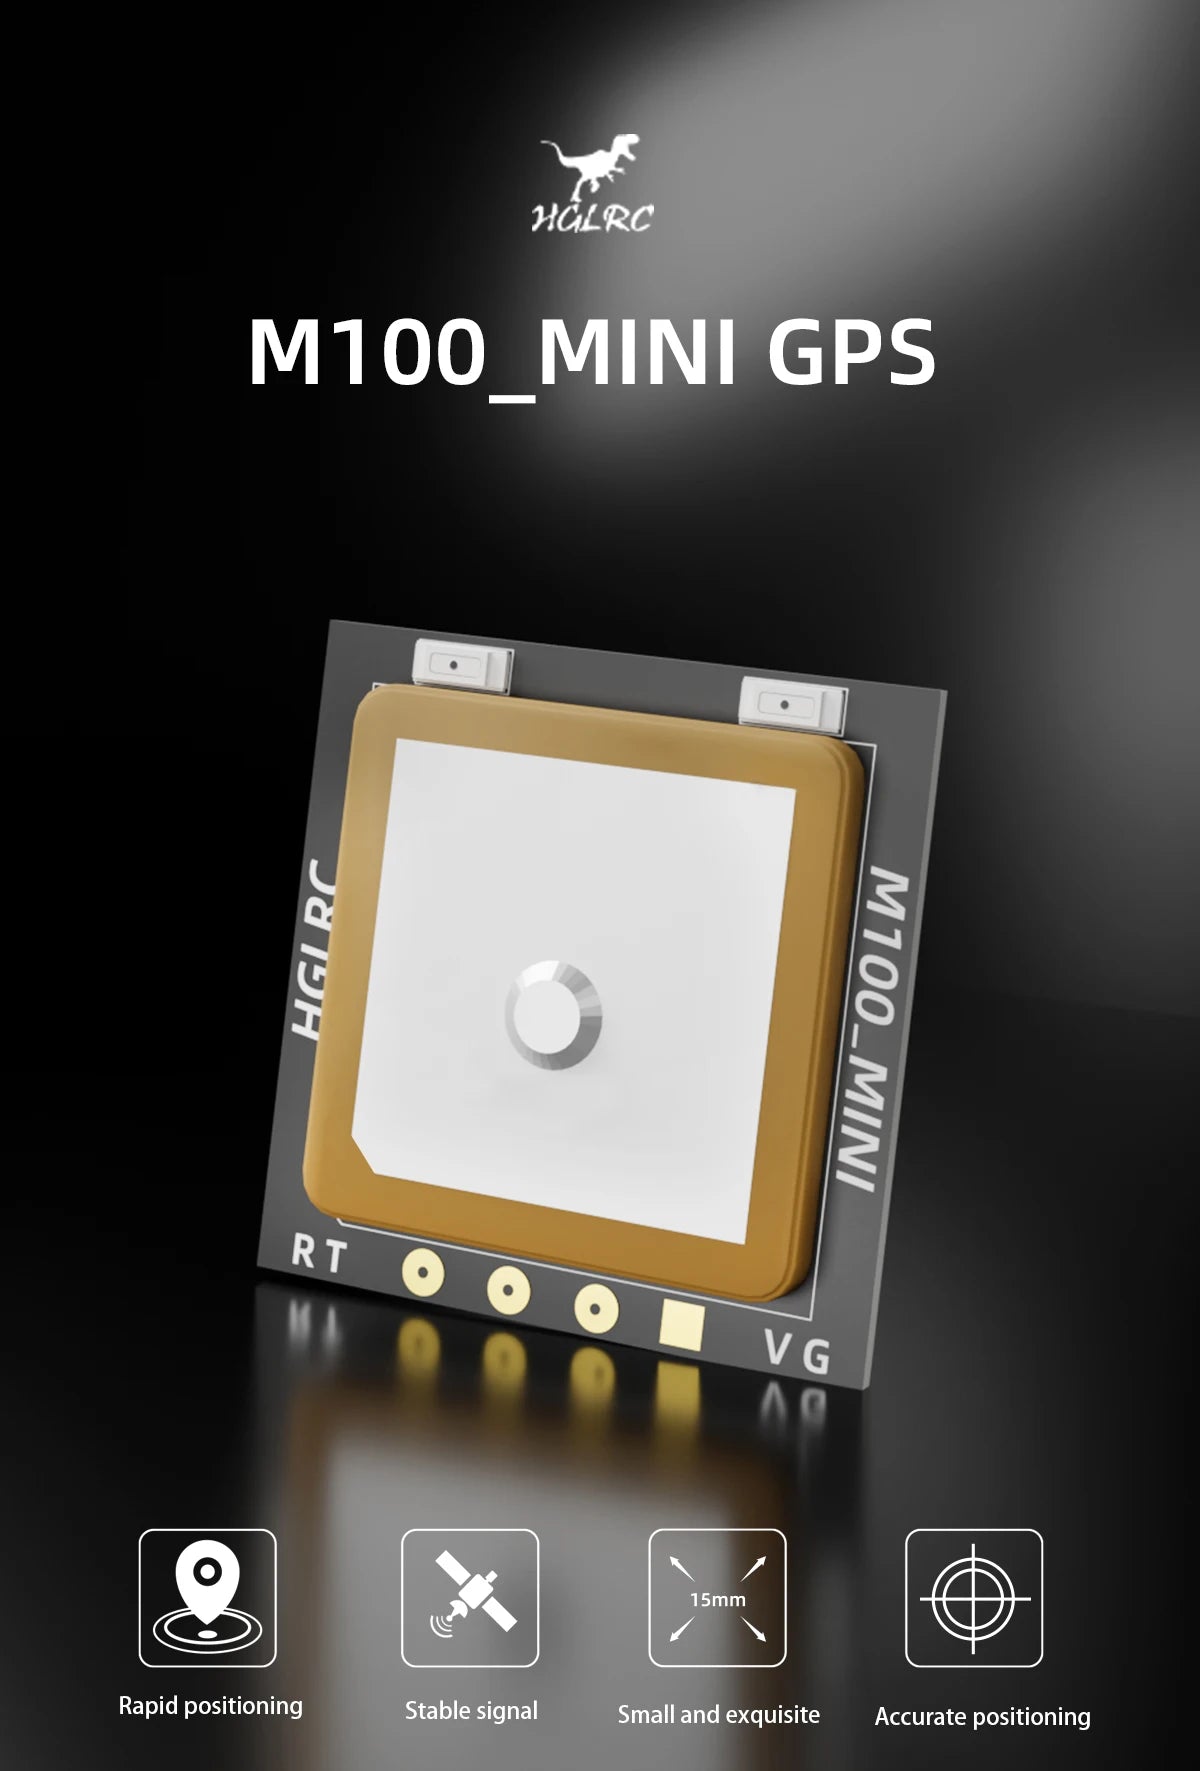 HGLRC M100 MINI GPS, MGLRC M1OO MINI GPS 1Smm Rapid positioning Stable signal Small and exquisite